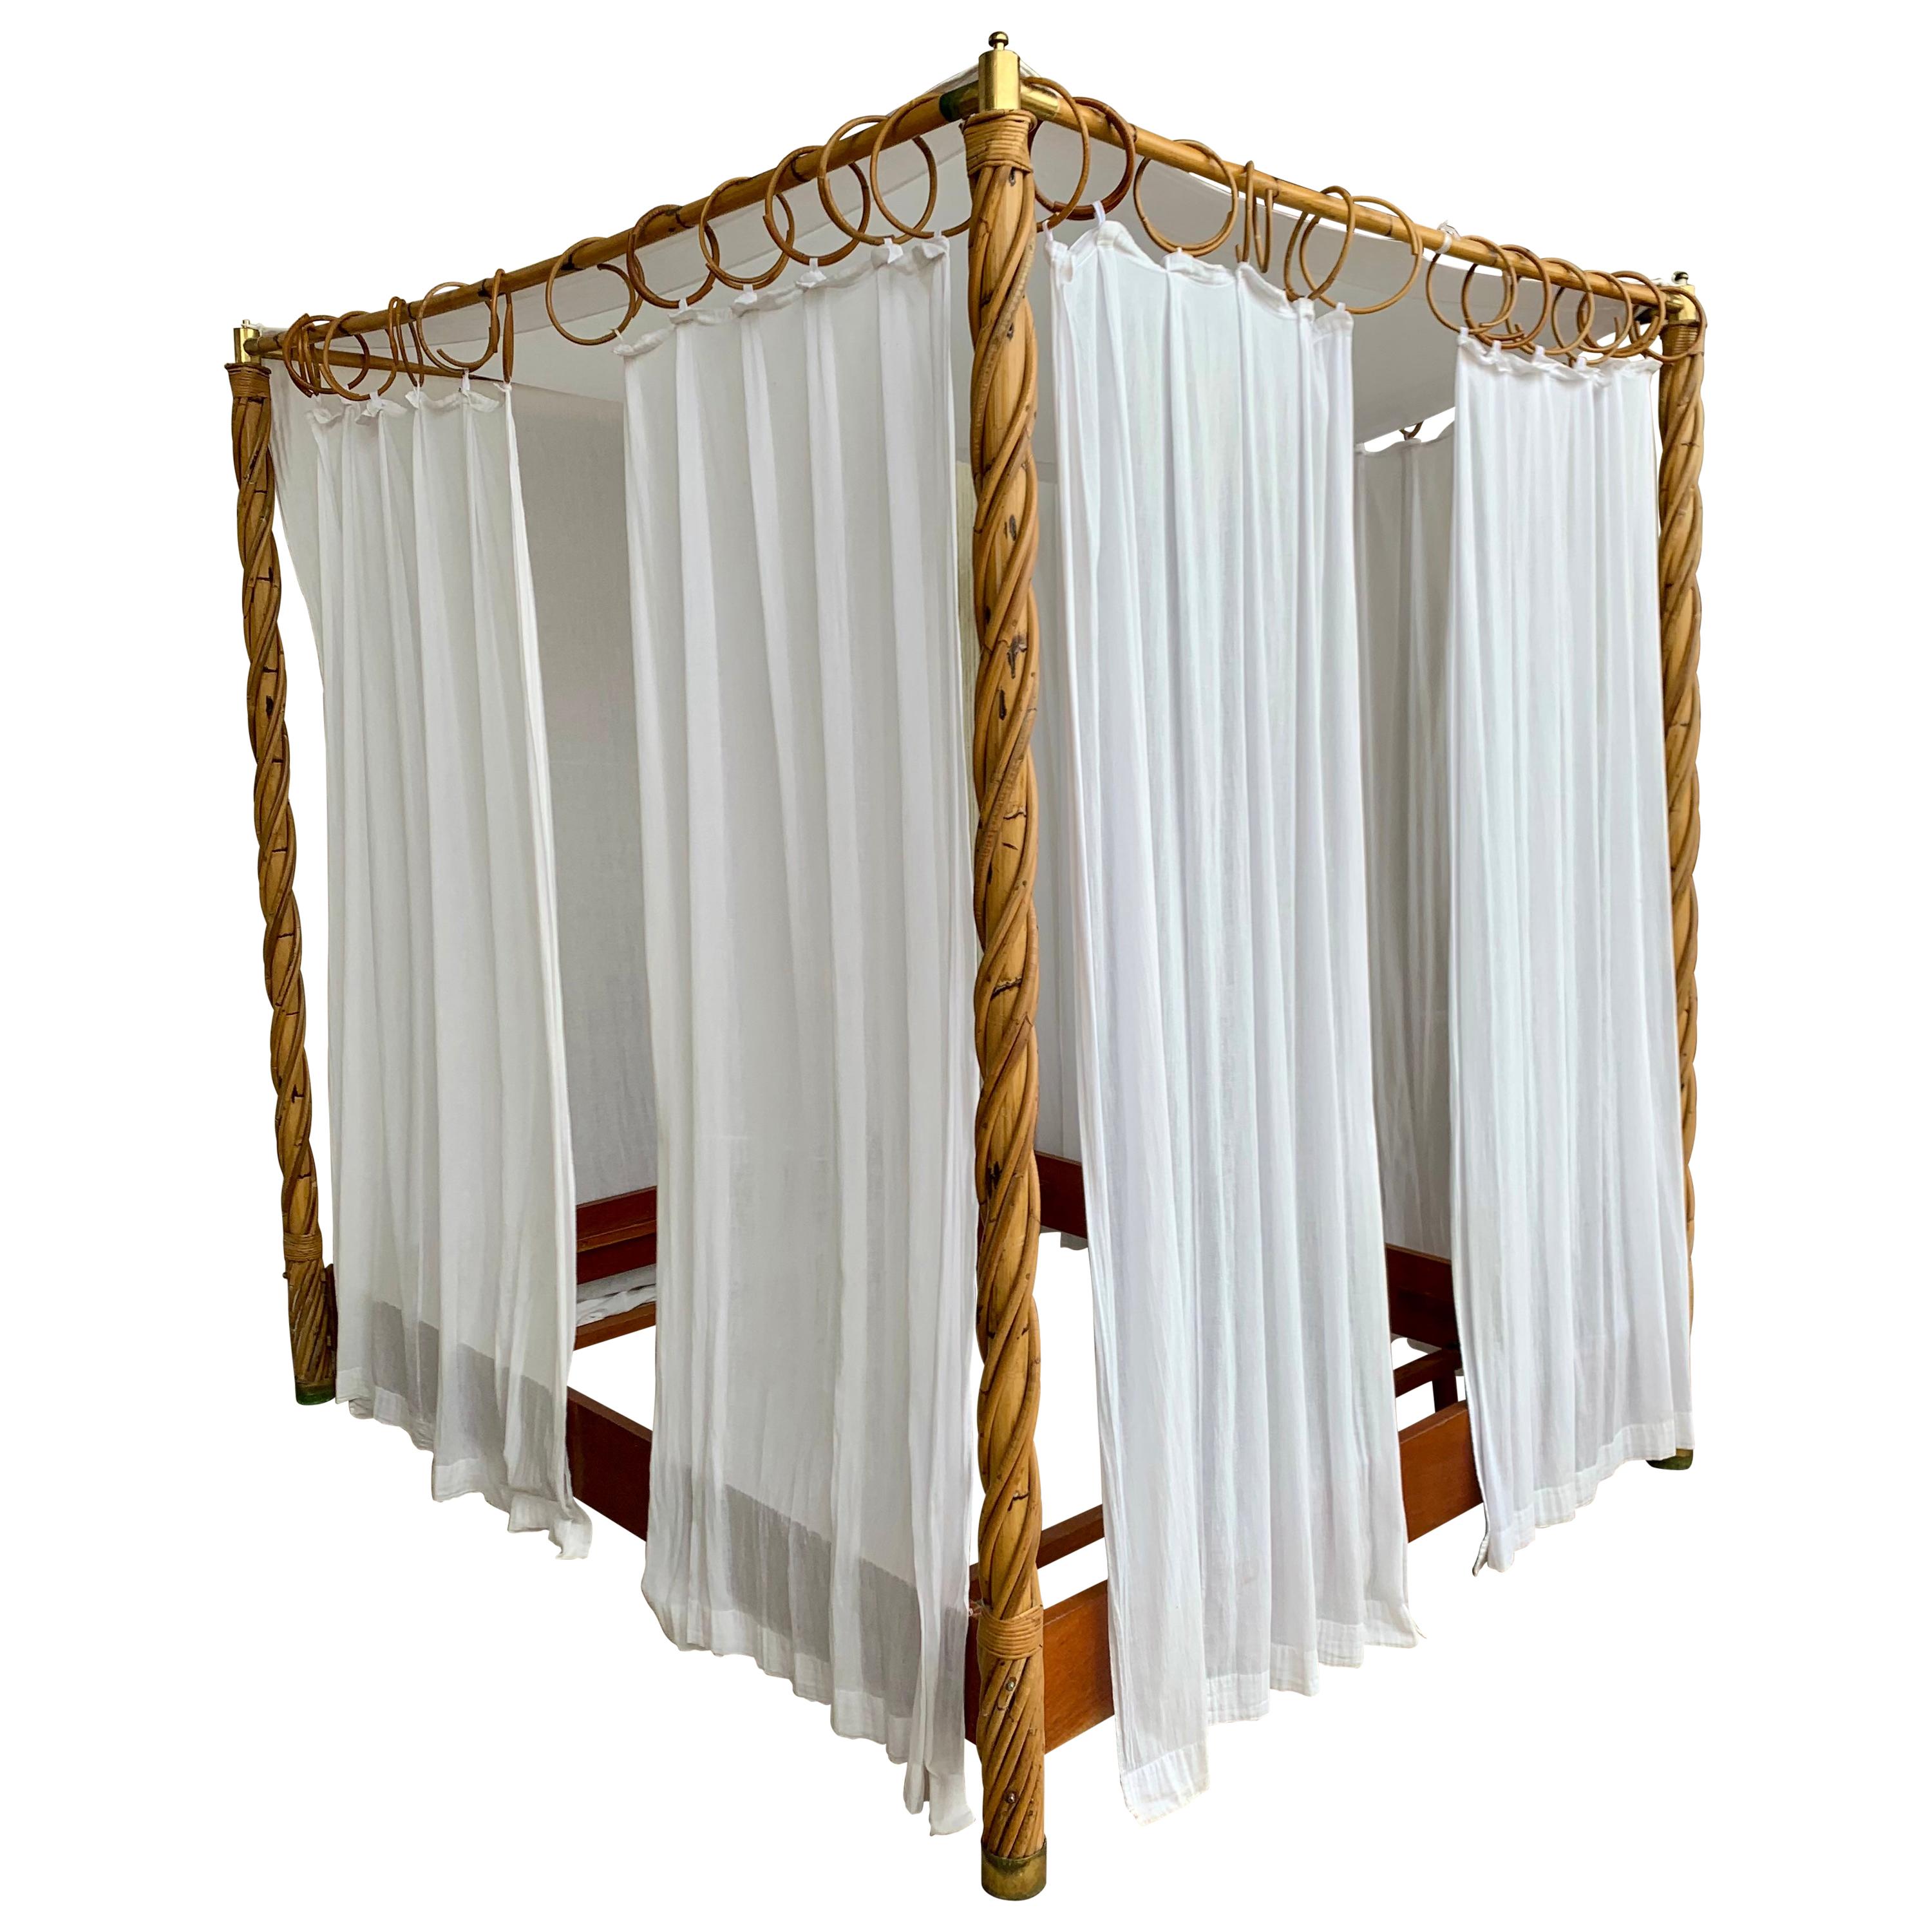 Midcentury Bamboo Canopy Four Poster Bed with Curtains or Outdoor Daybed